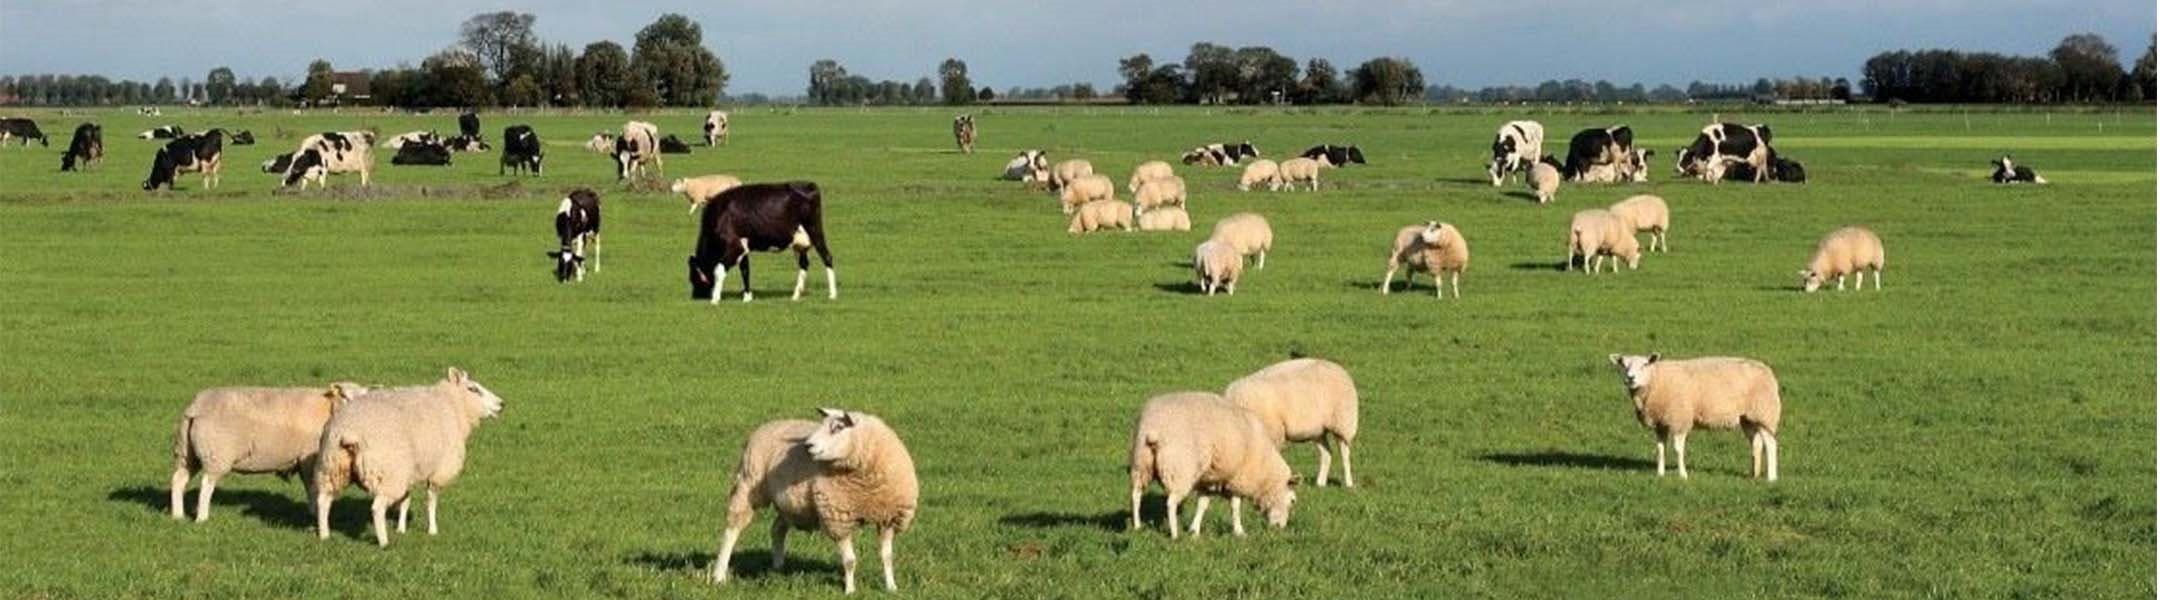 Dairy cows and sheep grazing